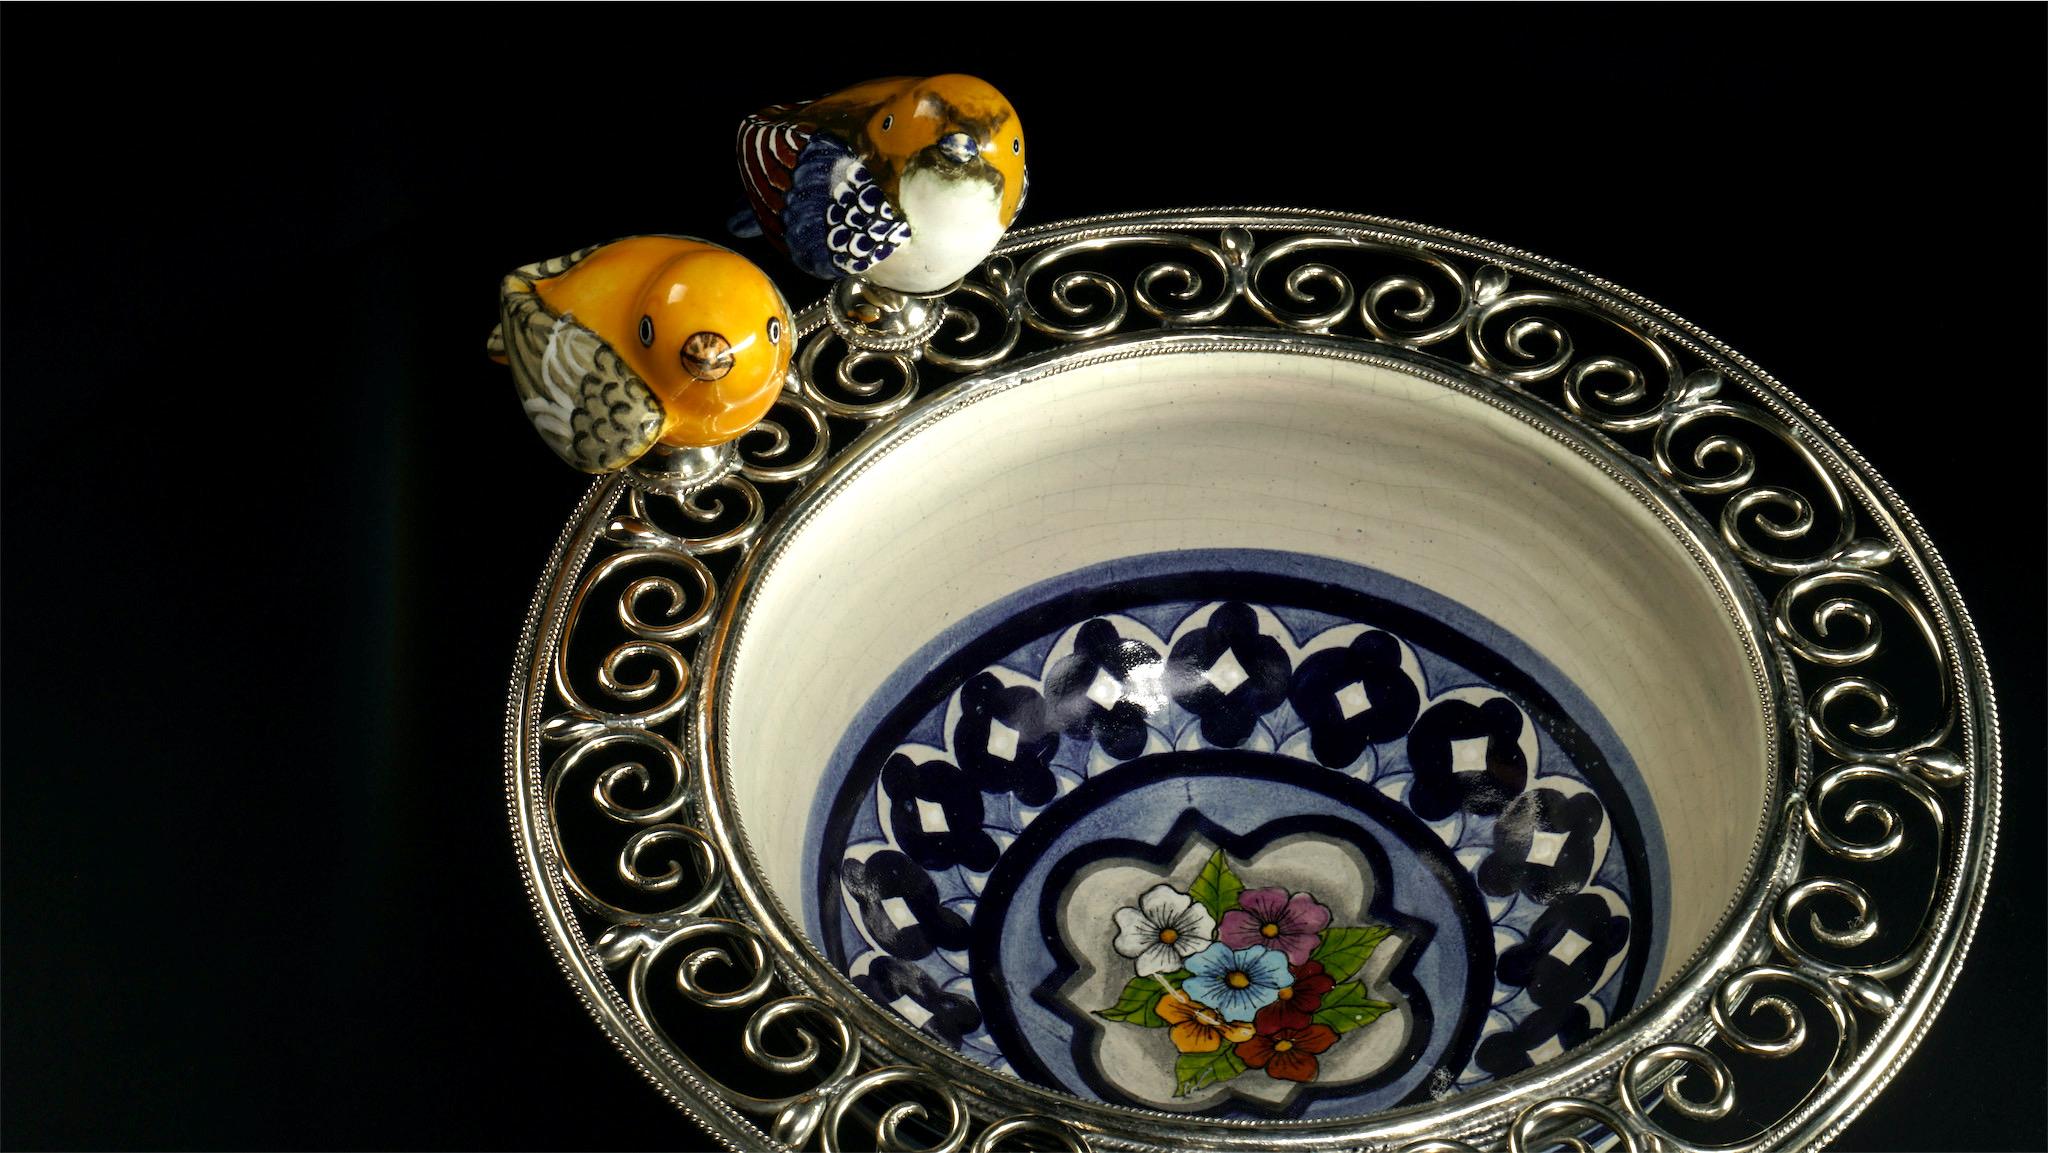 Always unique pieces is what you are going to hear about Jesus Guerrero Santo's work, all the pieces are handmade and created one by one it takes months to produce each peace. This ceramic and white metal (alpaca) bowl centrepiece, was created in